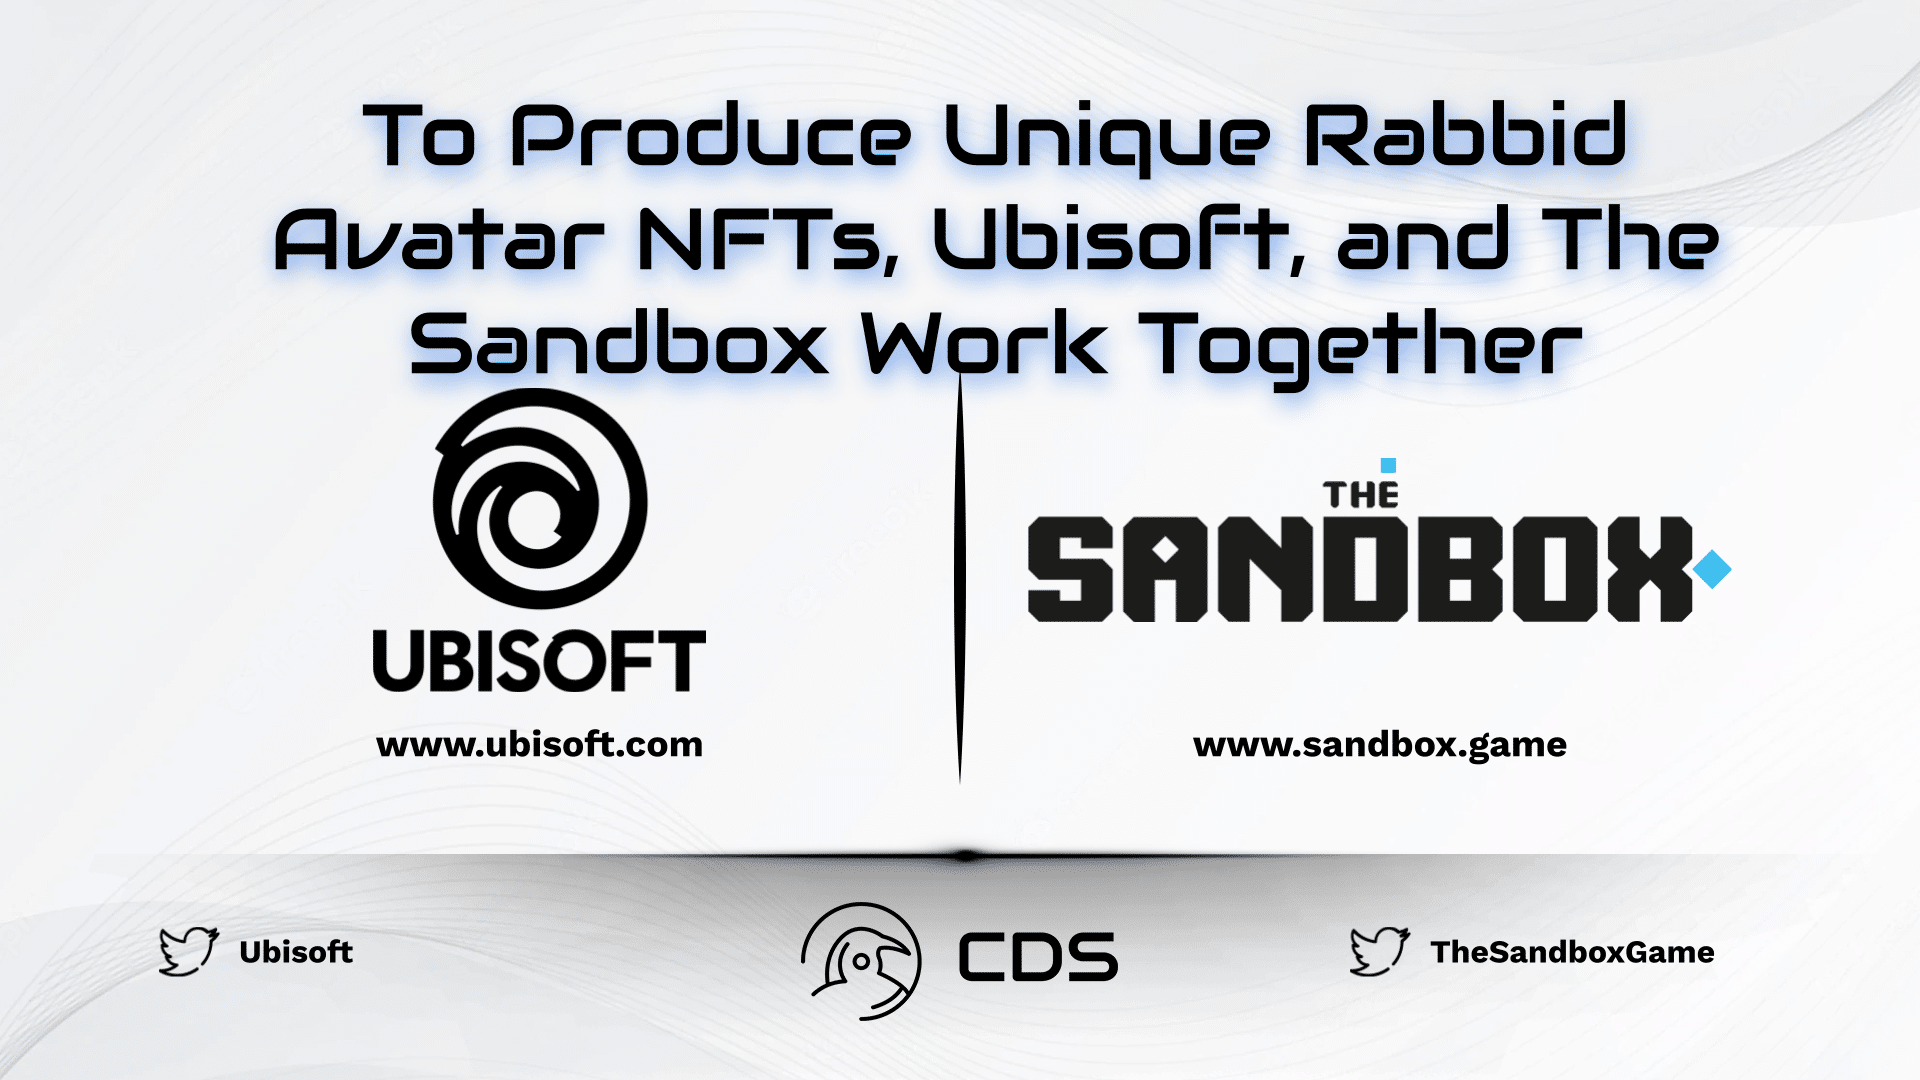 To Produce Unique Rabbid Avatar NFTs, Ubisoft, and The Sandbox Work Together